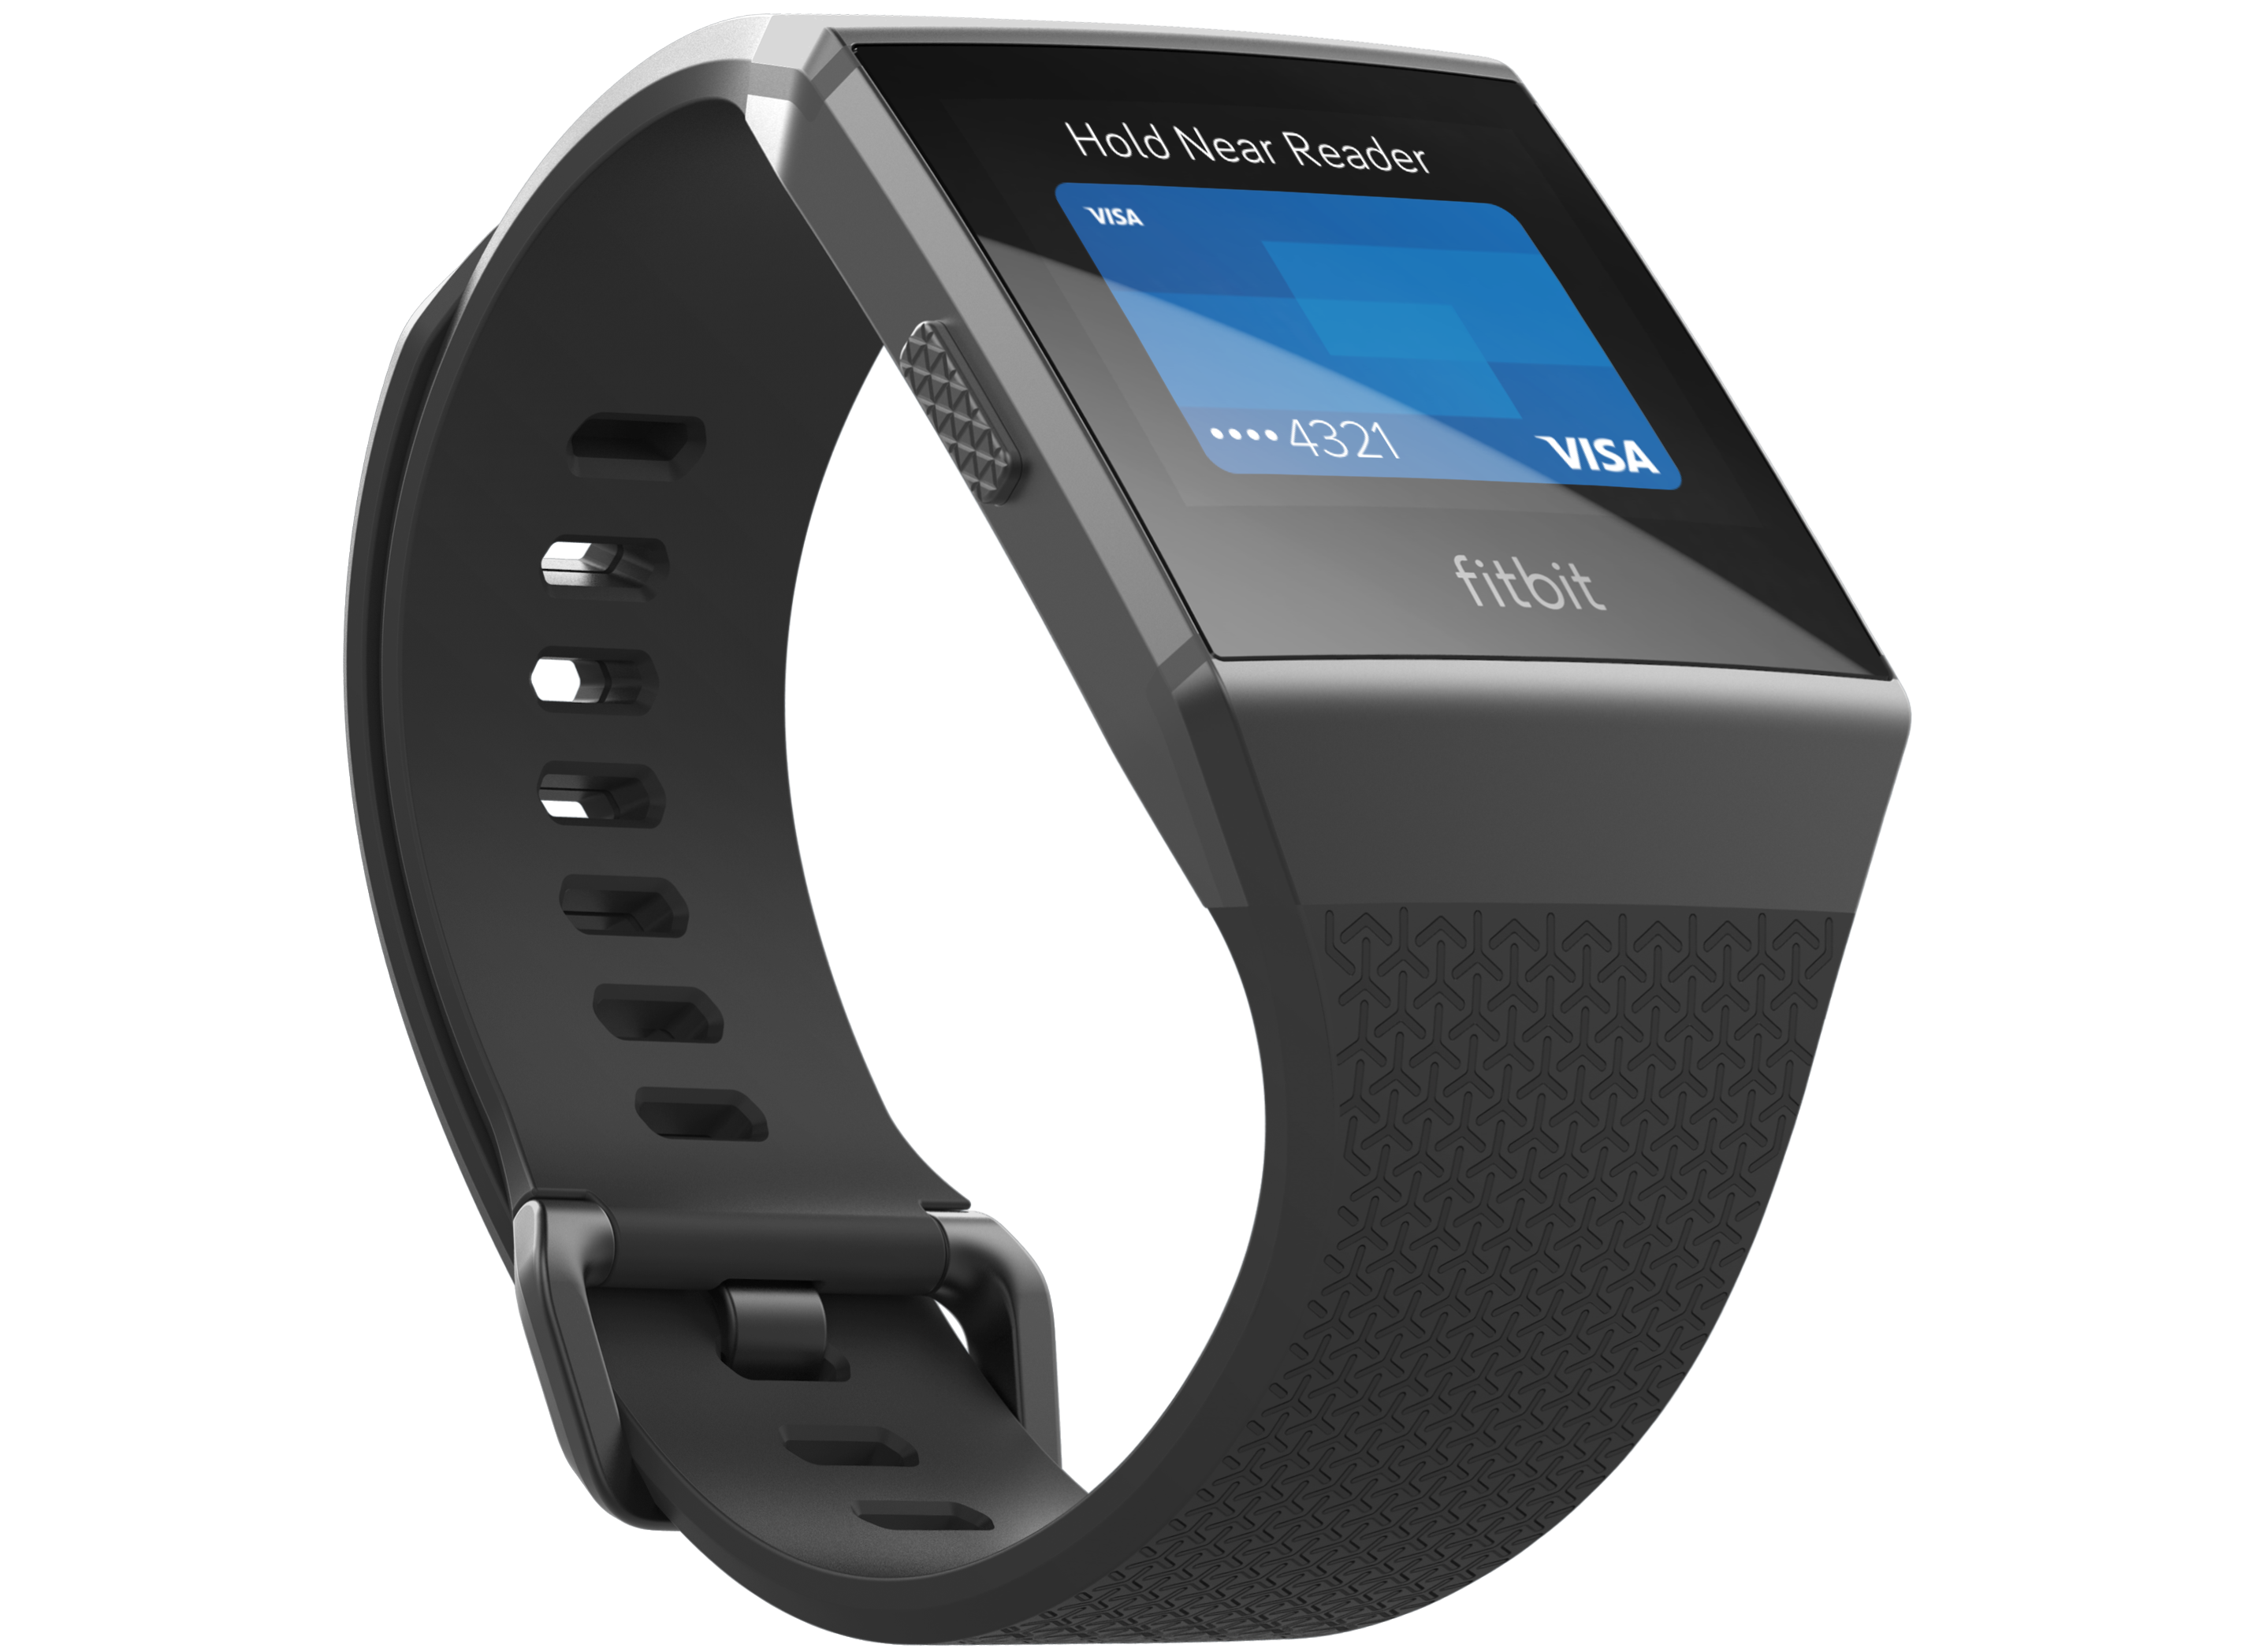 Fitbit And Visa Partner For Wearable 